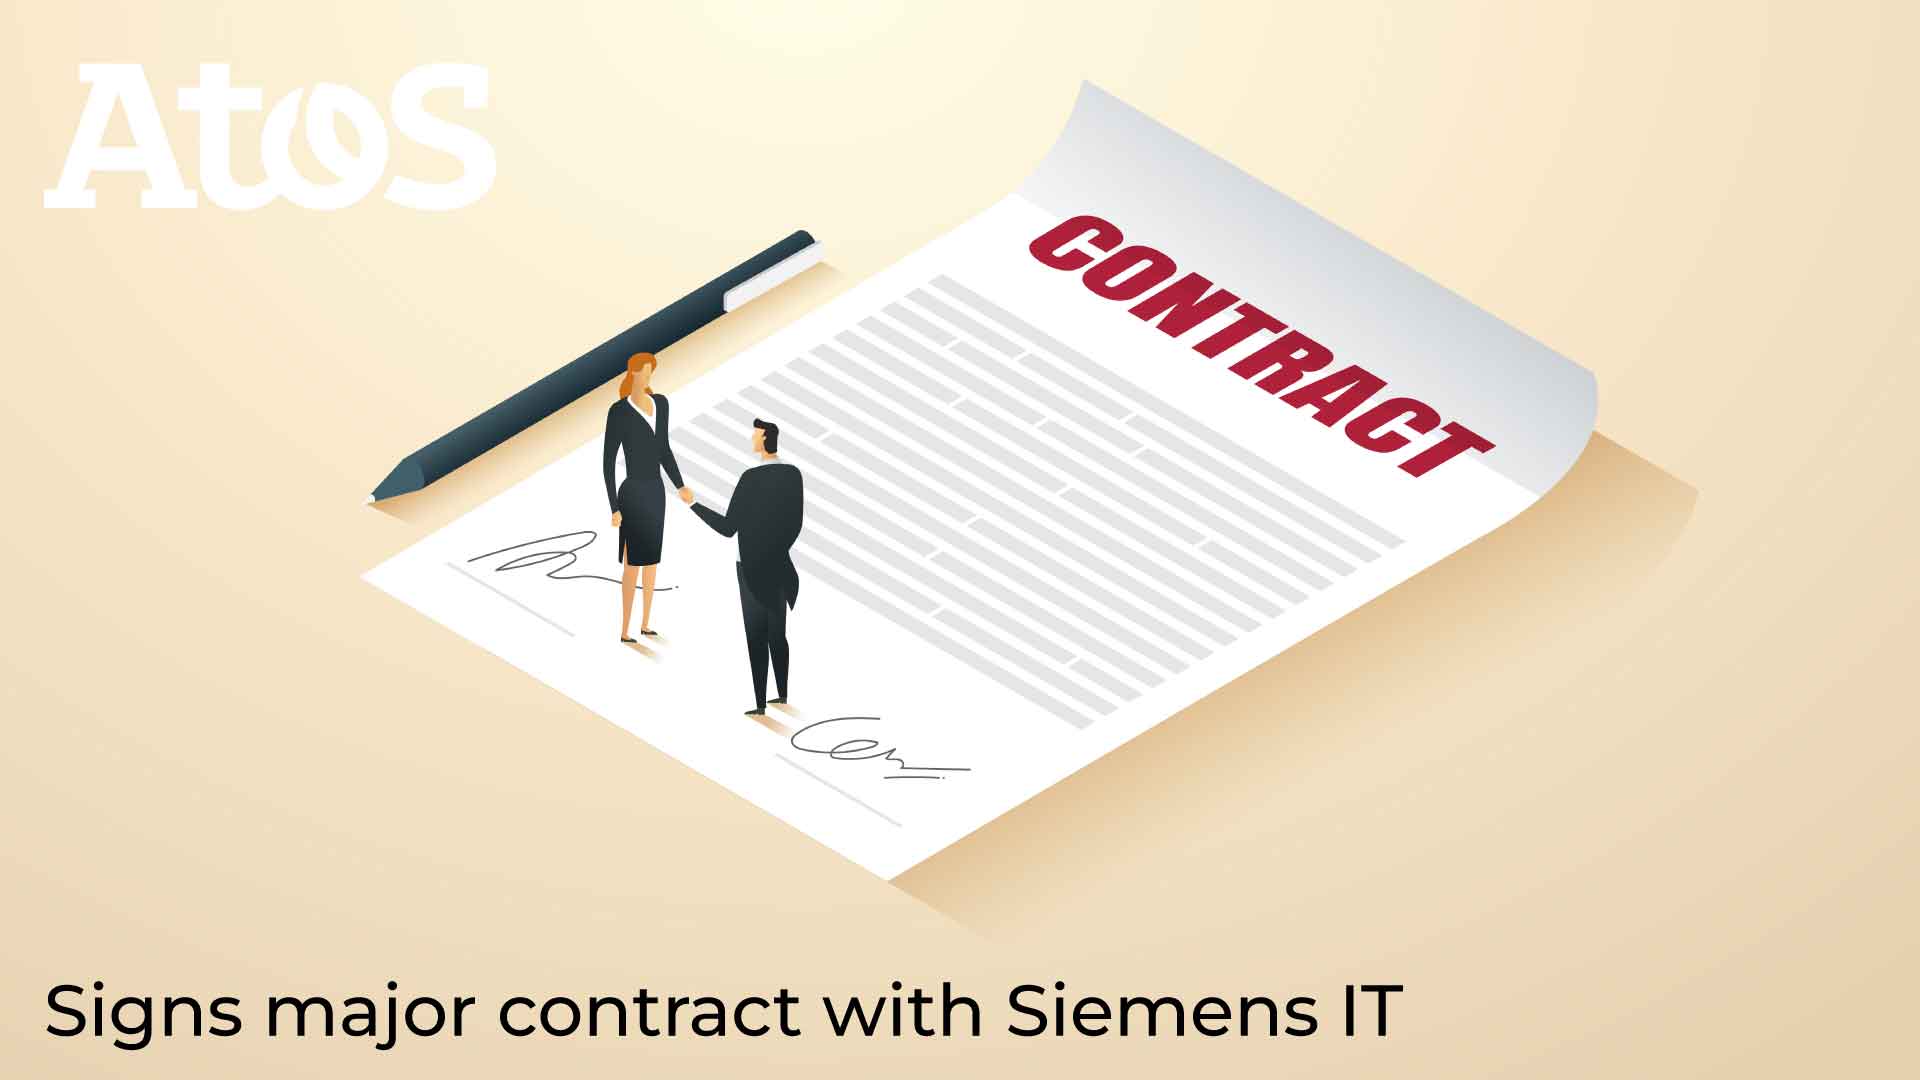 Atos signs major contract with Siemens IT to drive its digital transformation roadmap